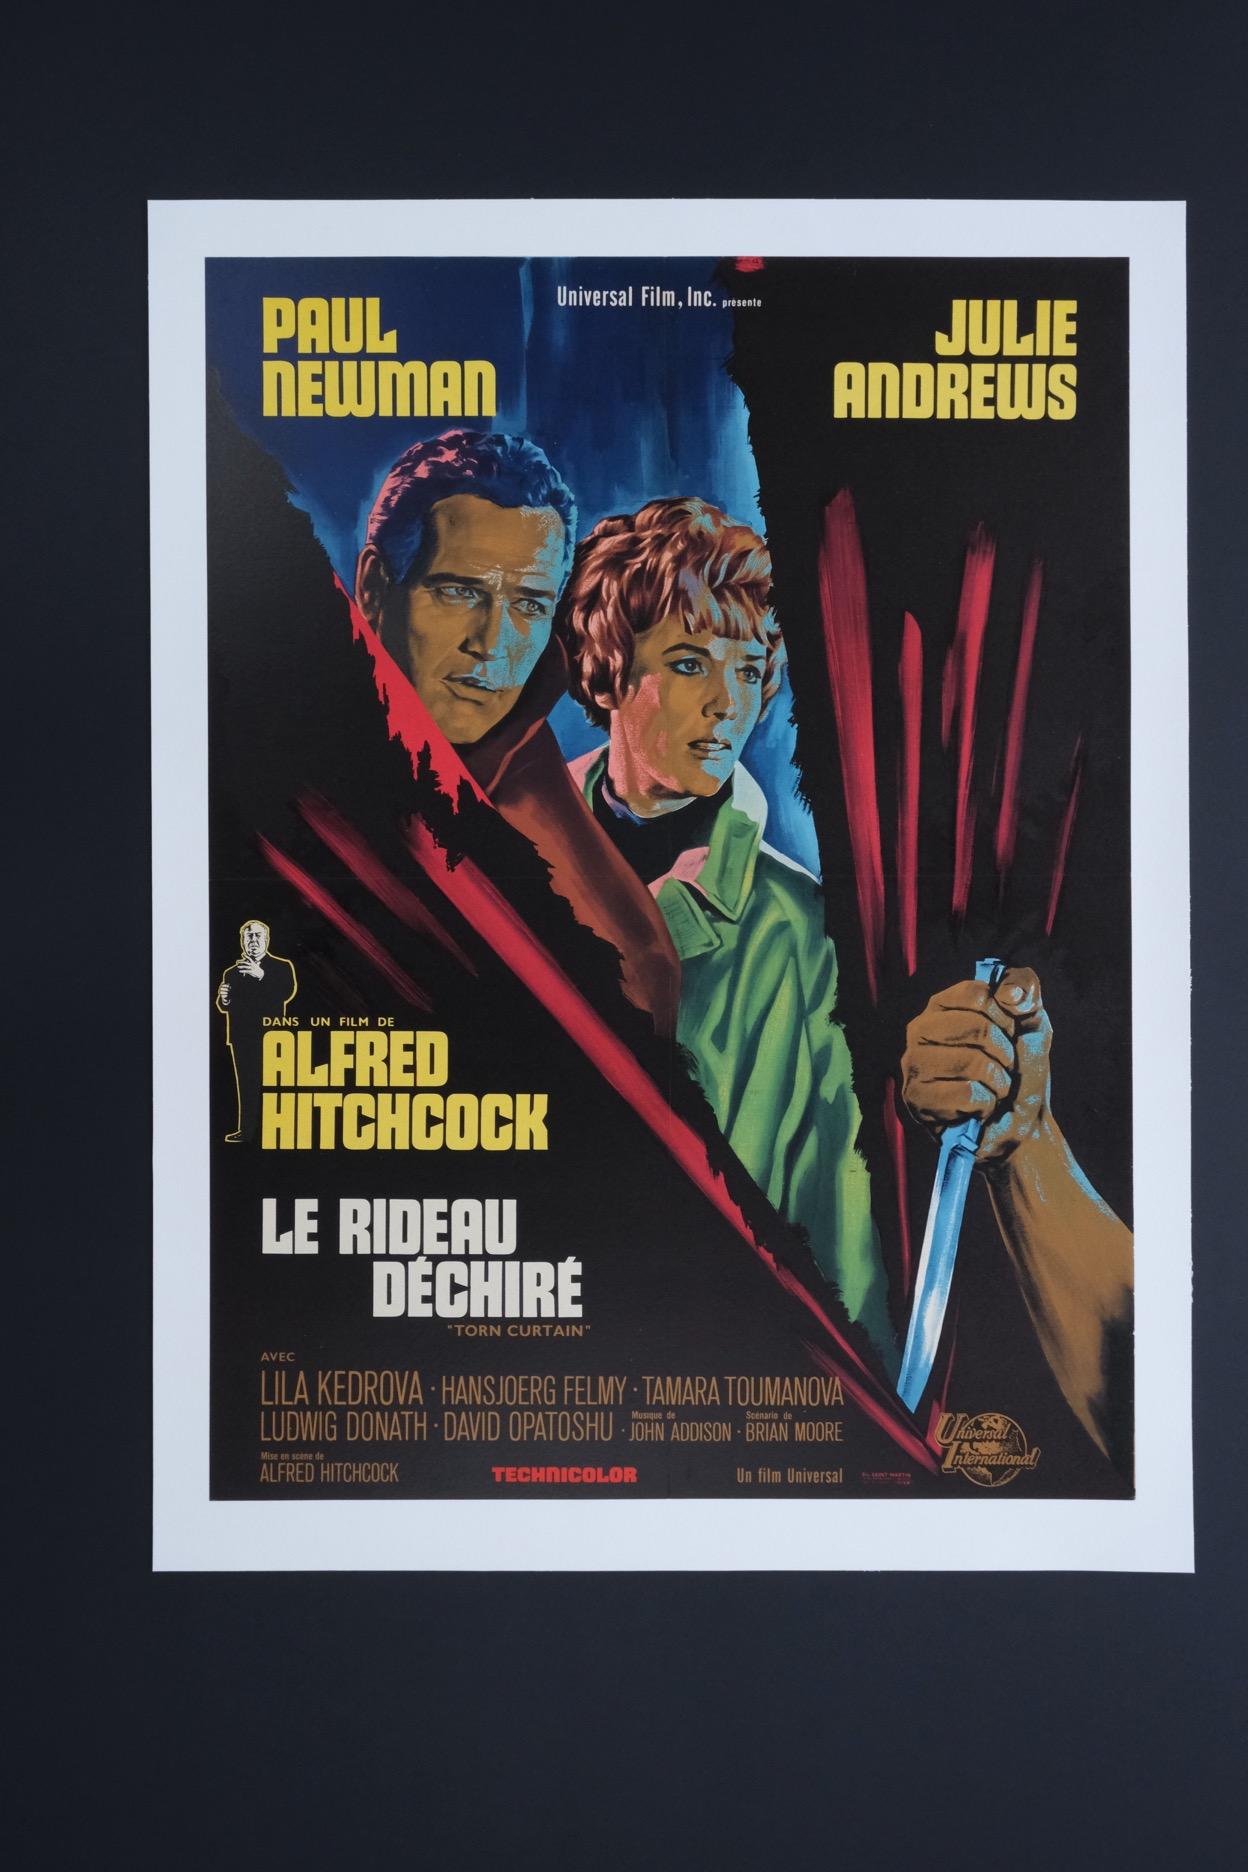 Size: French One Sheet

Condition: Mint

Dimensions: 880mm x 630mm (inc. Linen Border)

Type: Original Lithographic Print - Linen Backed

Year: 1966

Details: An incredibly rare and one of the few remaining original posters produced for